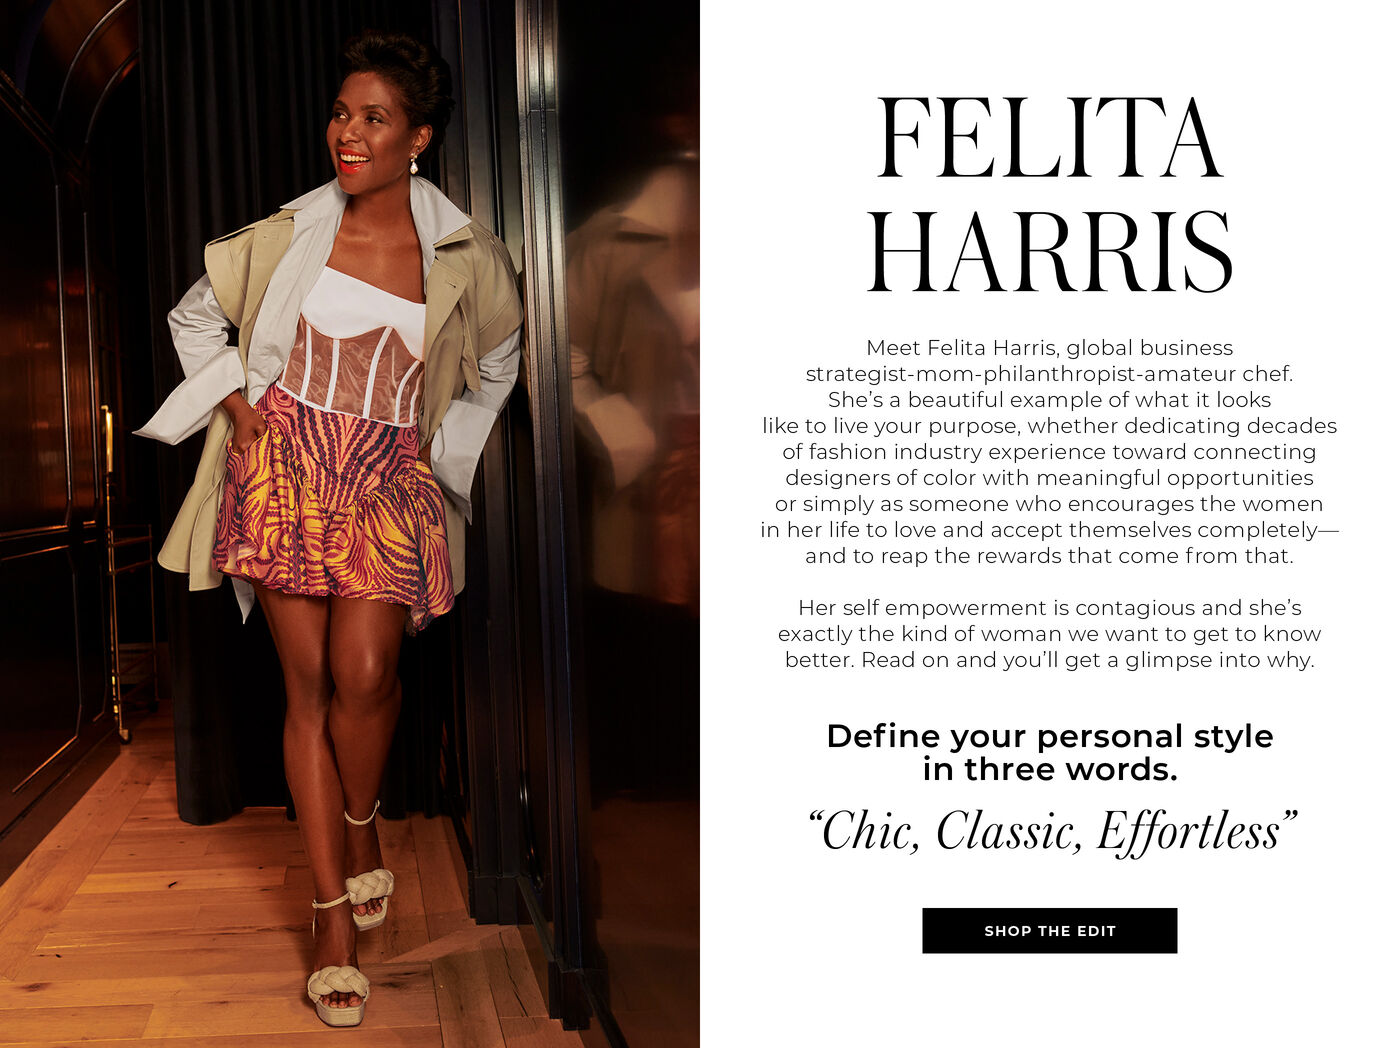 "FELITA HARRIS Meet Felita Harris, global business strategist-mom-philanthropist-amateurchef. She's a beautiful example of what it looks like to live your purpose, whether dedicating decades of fashion industry experience toward connecting designers of color with meaningful opportunities or simply as someone who encourages the women in her life to love and accept themselves completely. and to reap the rewards that come from that. Her self empowerment is contagious and she's exactly the kind of woman we want to get to know better. Read on and you'll get a glimpse into why. Define your personal style in three words. ""Chic, Classic, Effortless"""